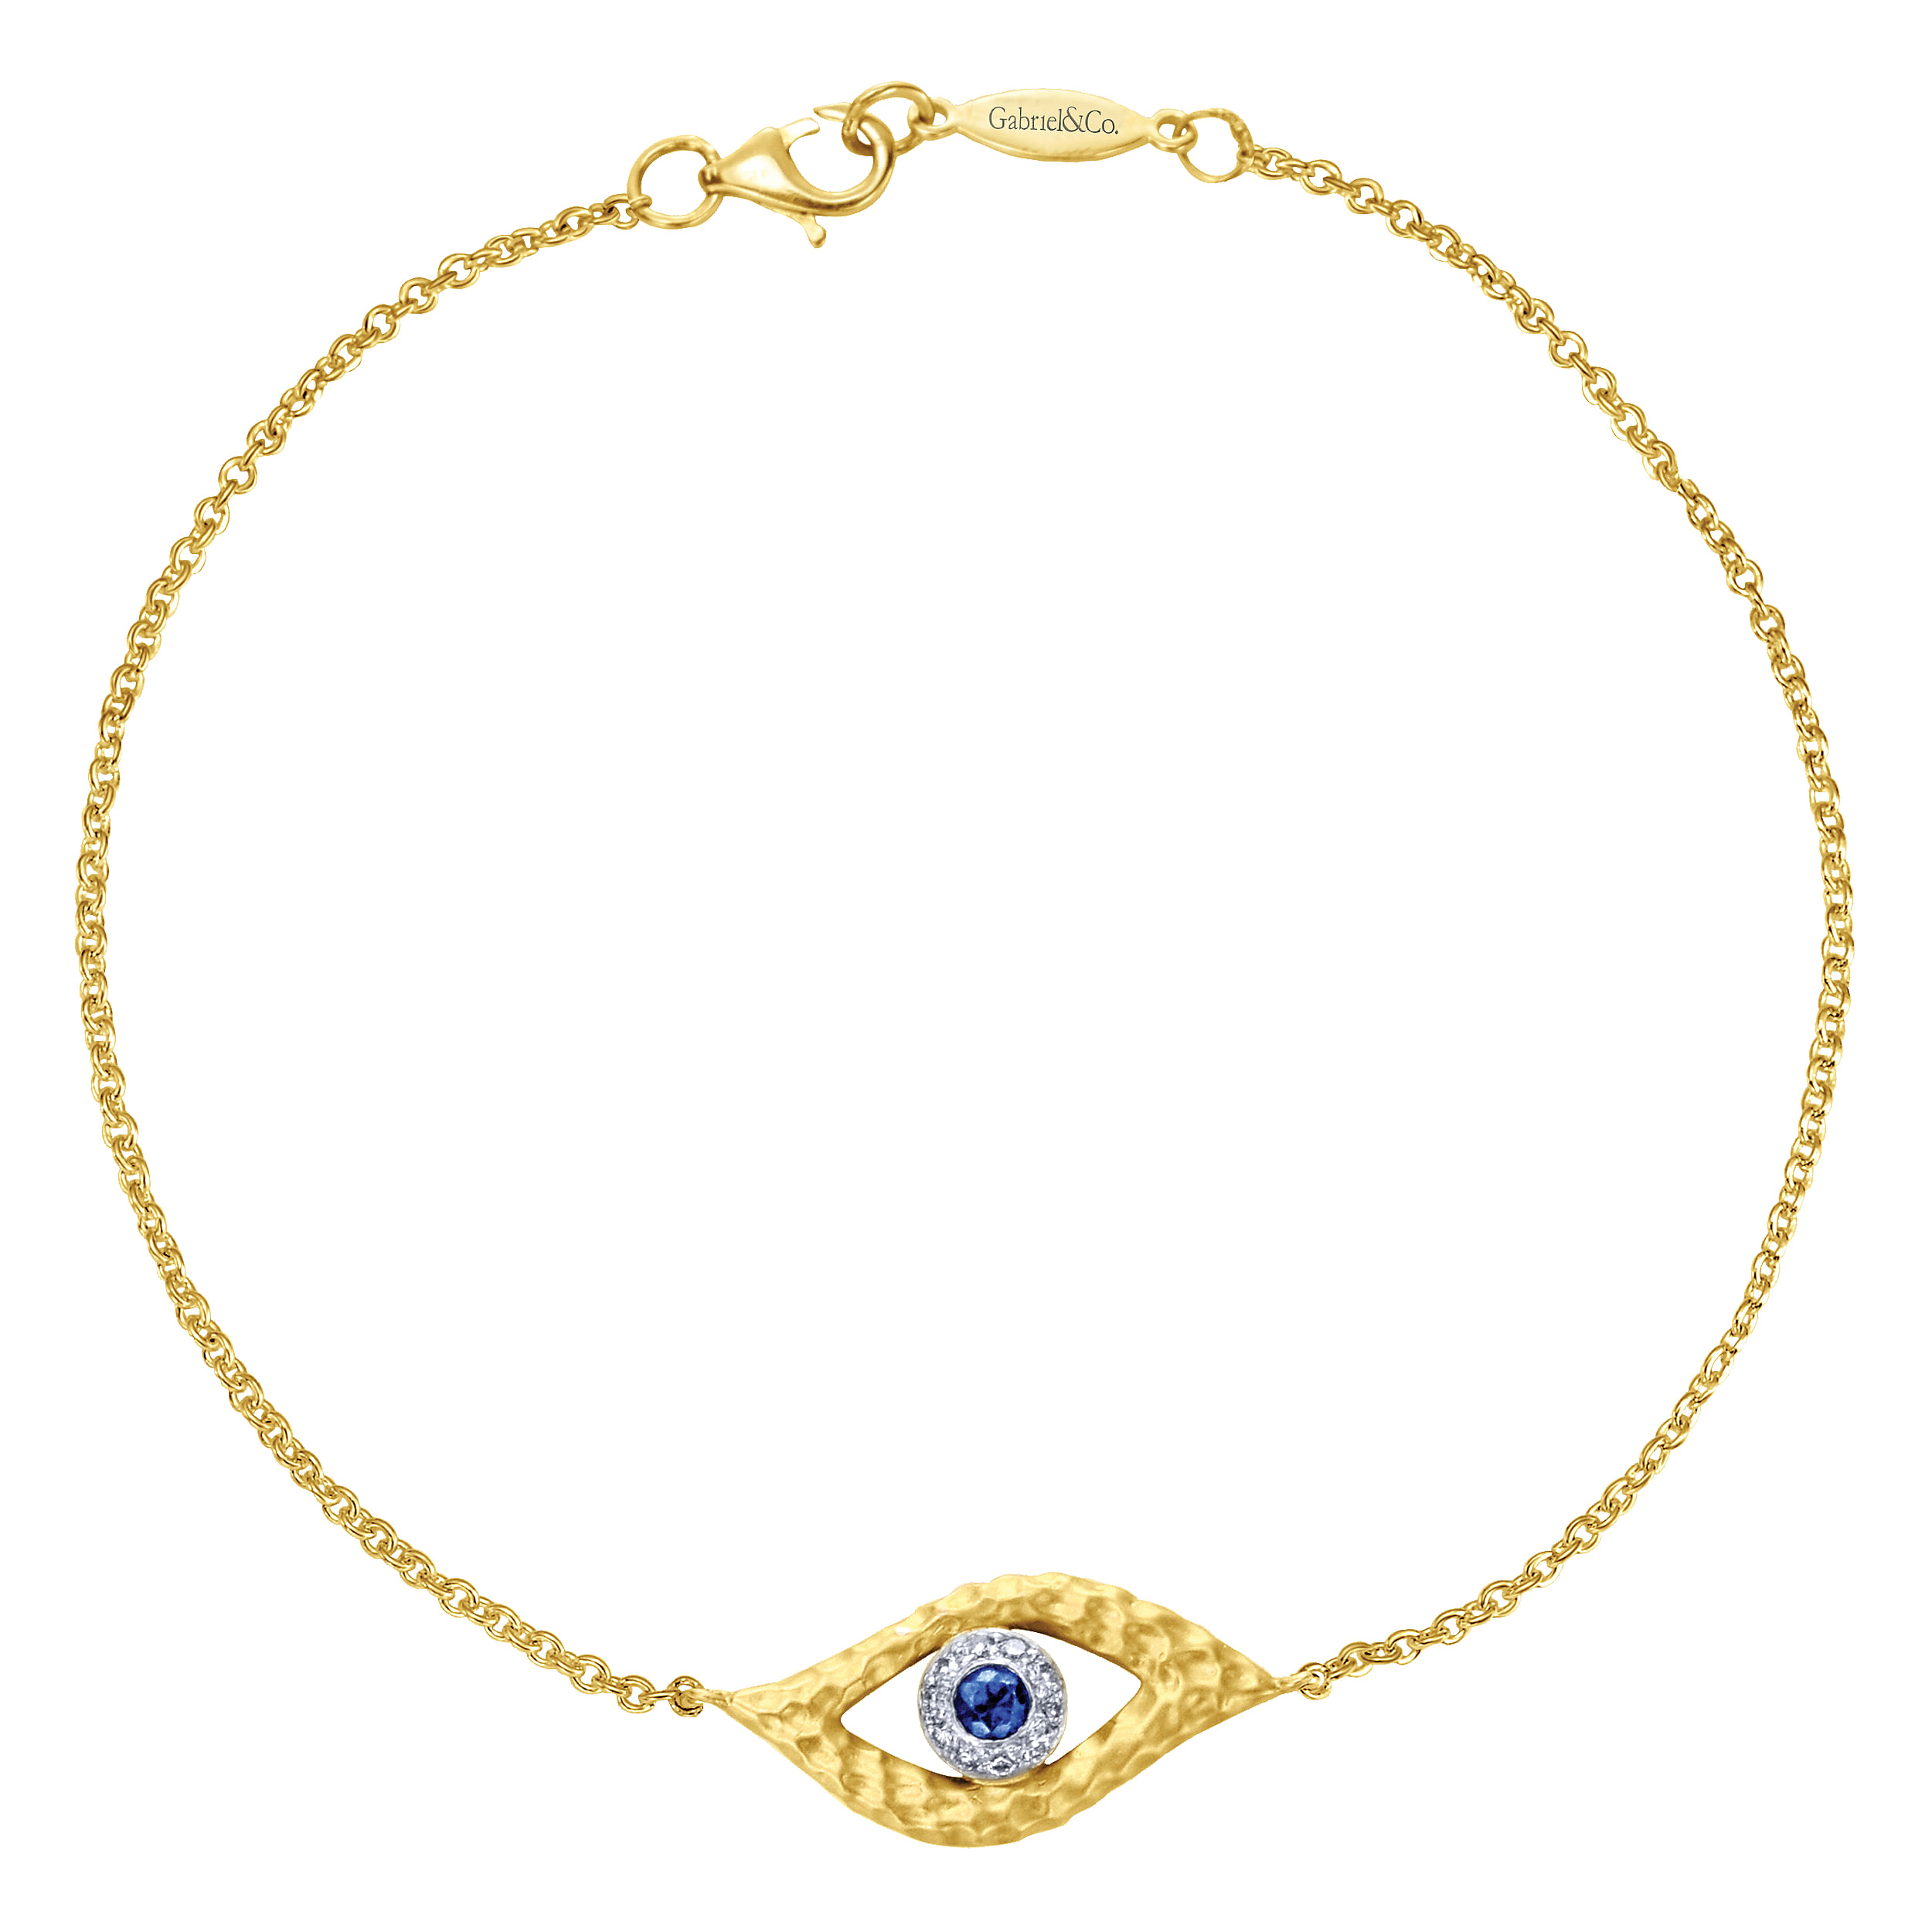 14K Yellow and White Gold Bracelet with Eye Charm and Blue Sapphire with Diamond 